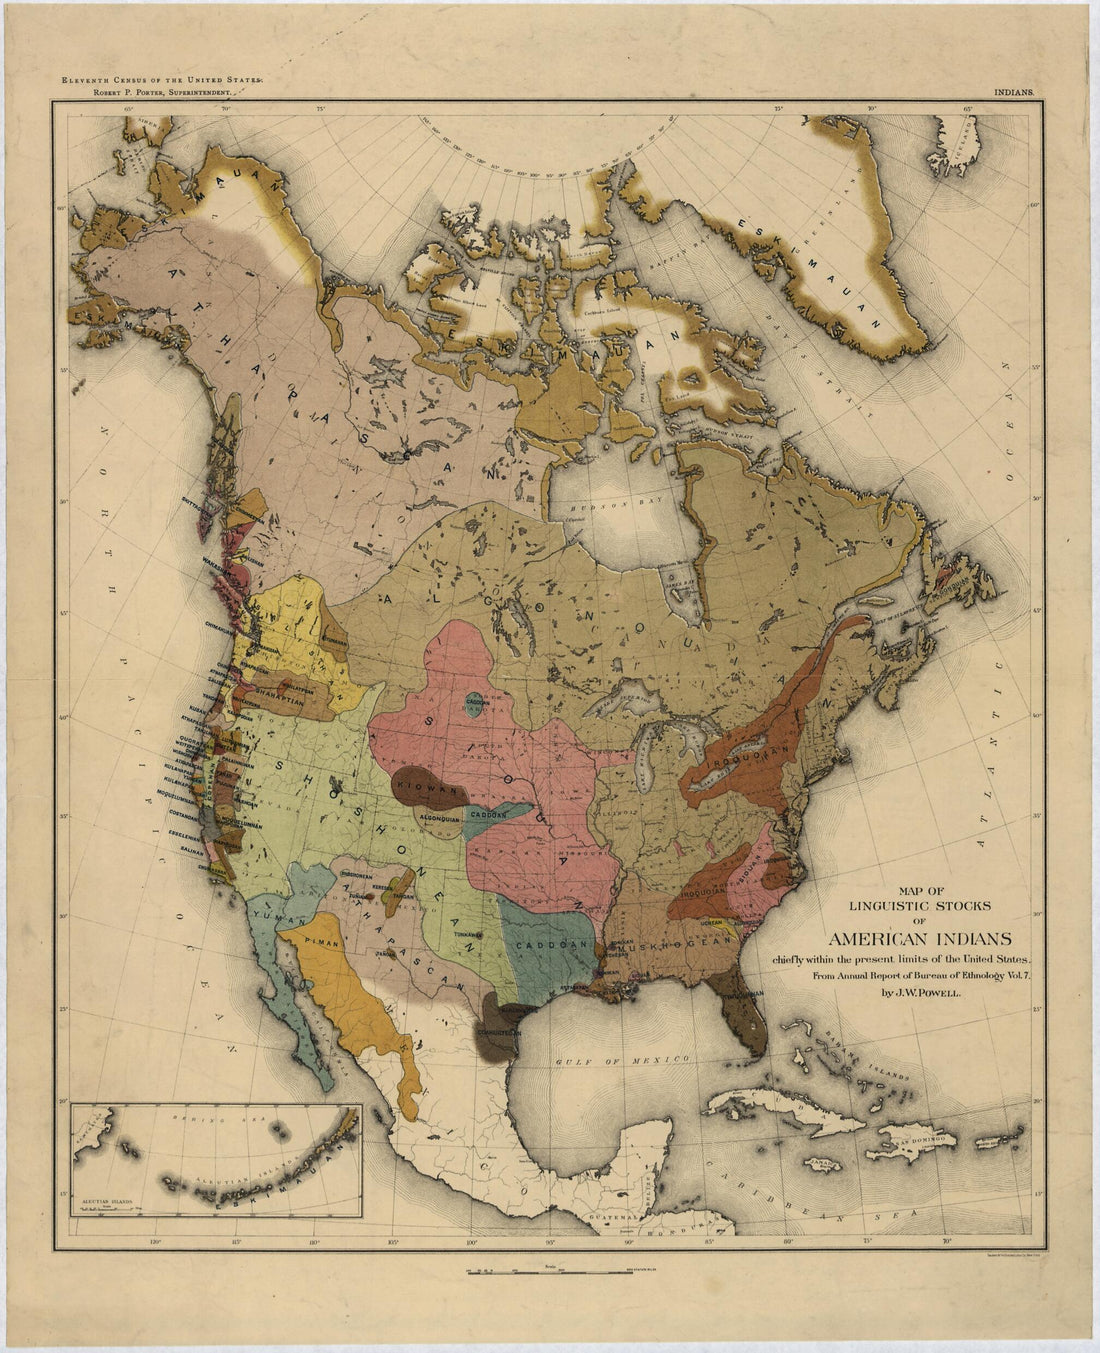 This old map of Map of Linguistic Stocks of American Indians from 1890 was created by John Wesley Powell in 1890